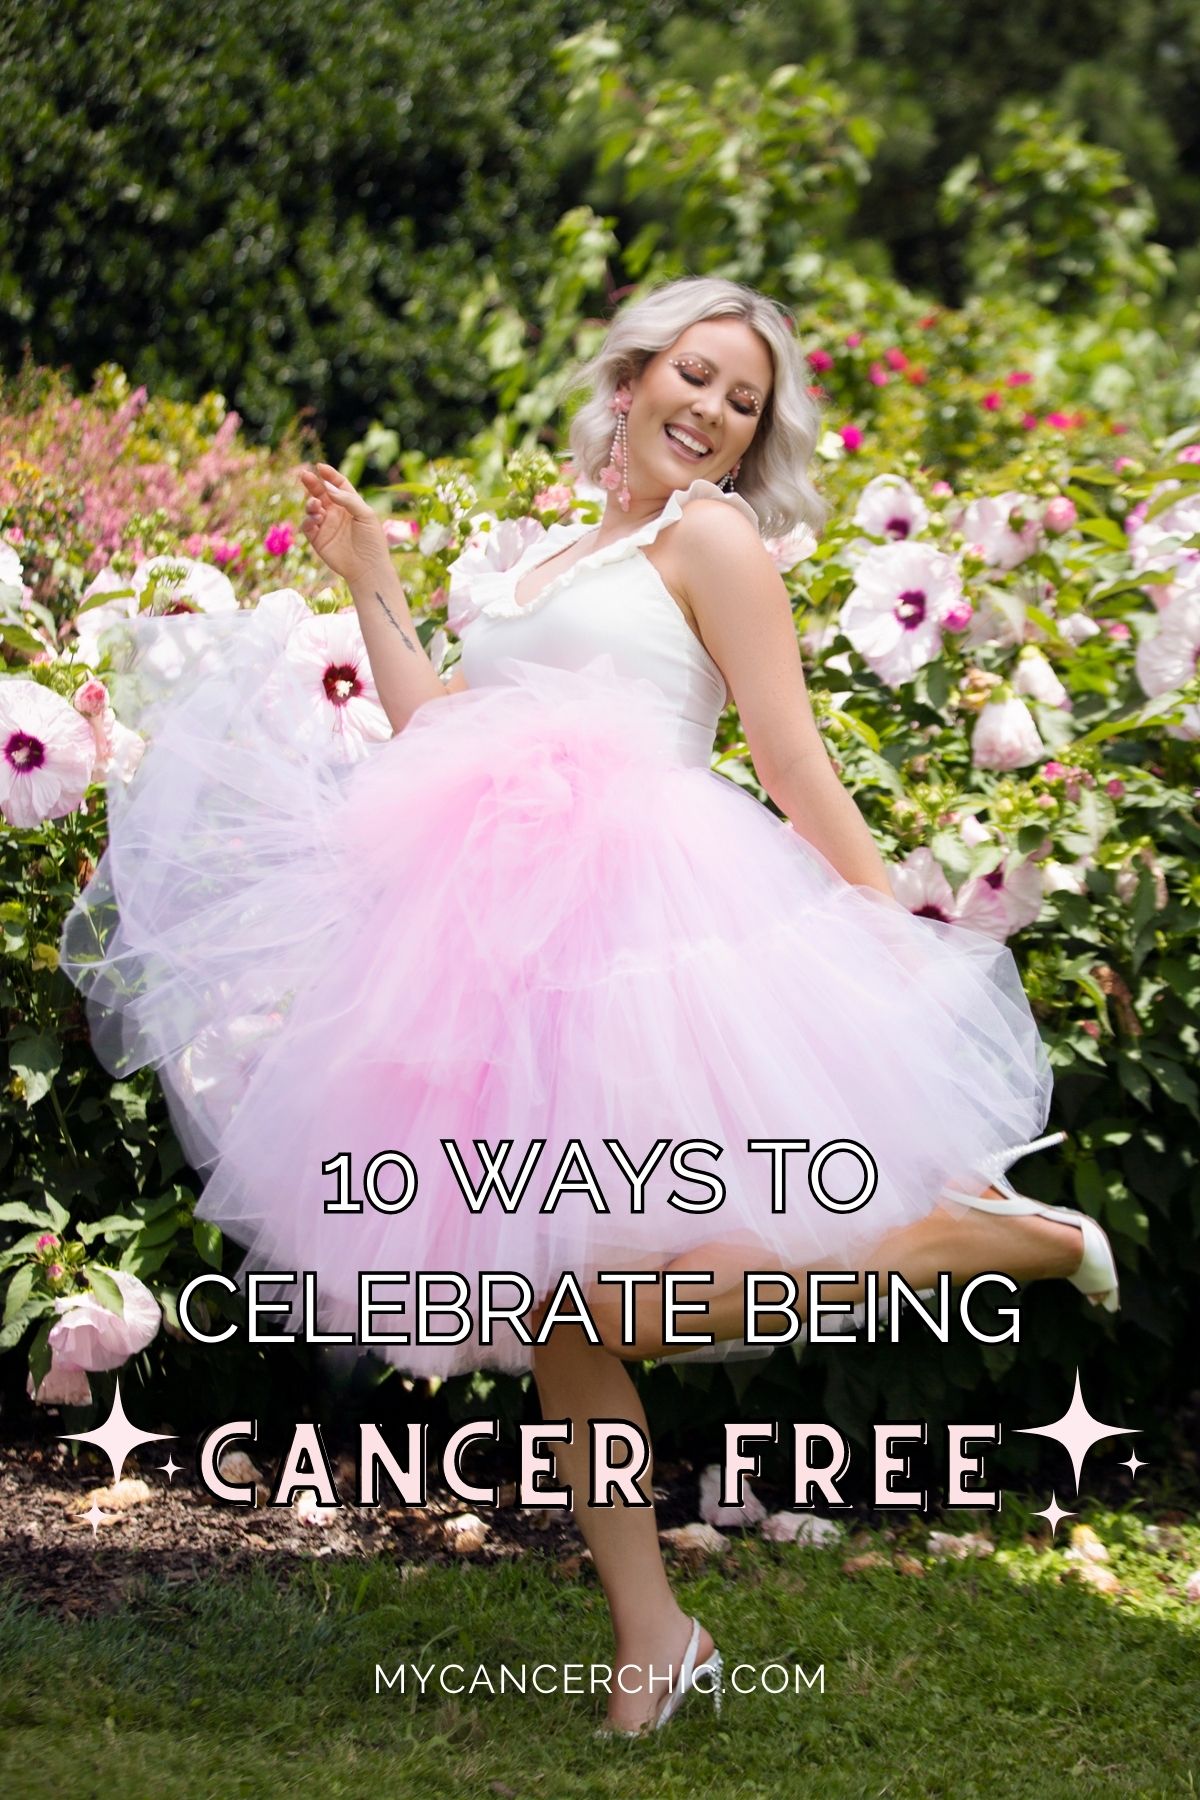 Celebrate Being Cancer Free